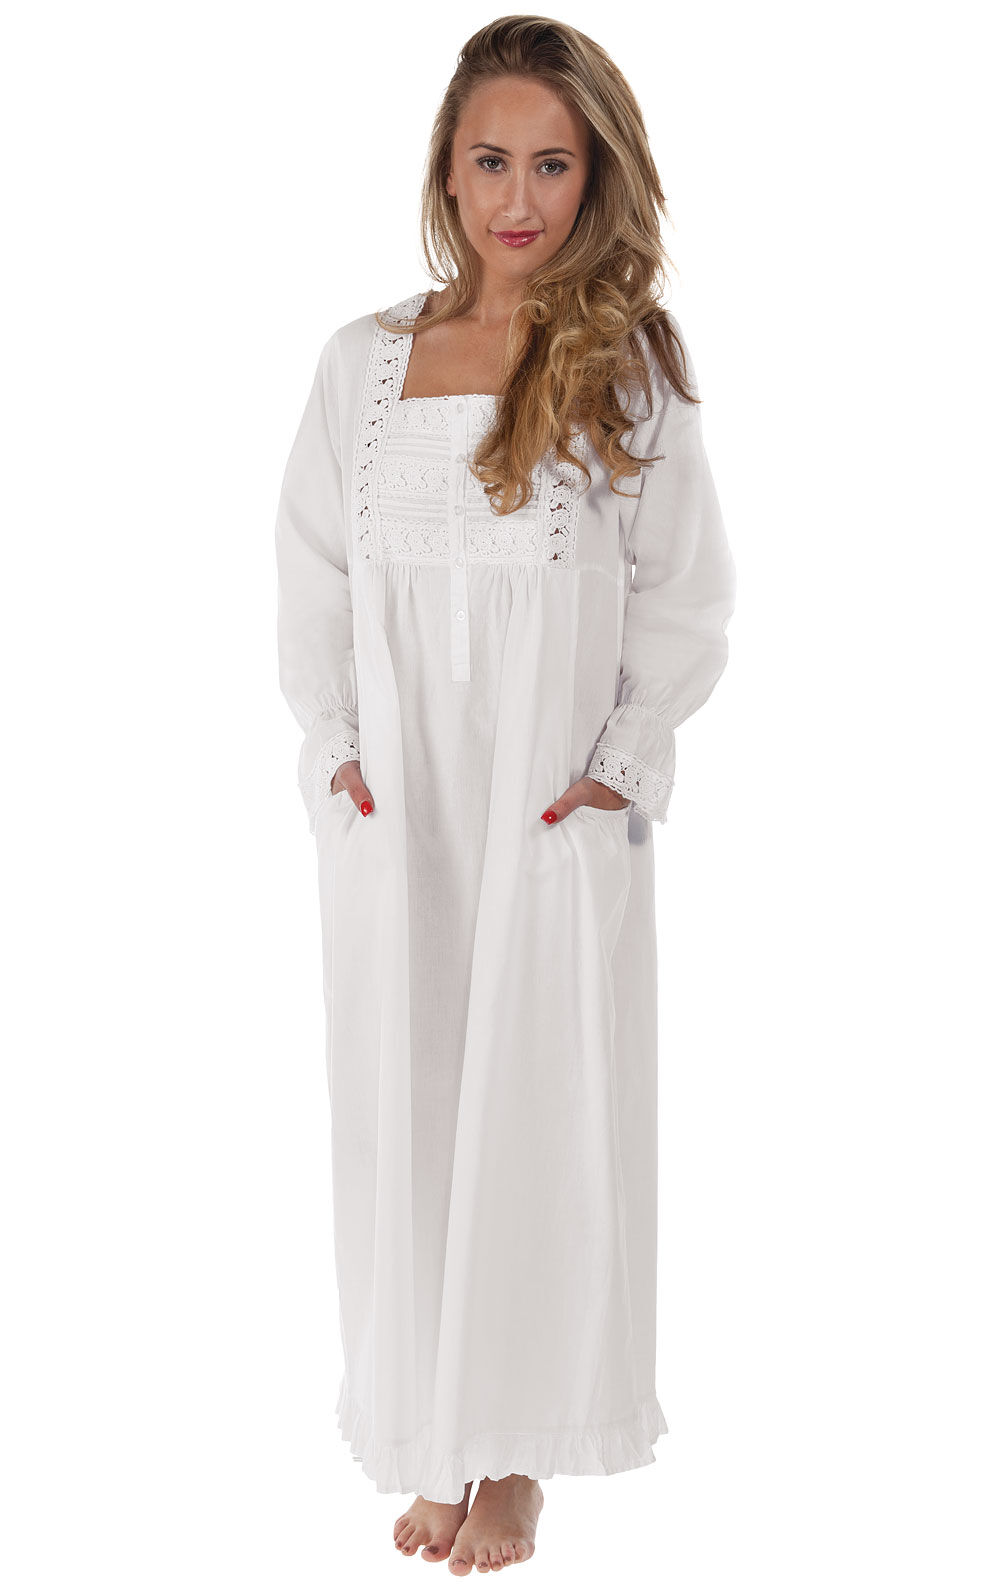 Available in Sizes 10-36 Undercover Ladies Floral Jersey Cotton Rich Nightie Nightdress Nightshirt & Pyjamas